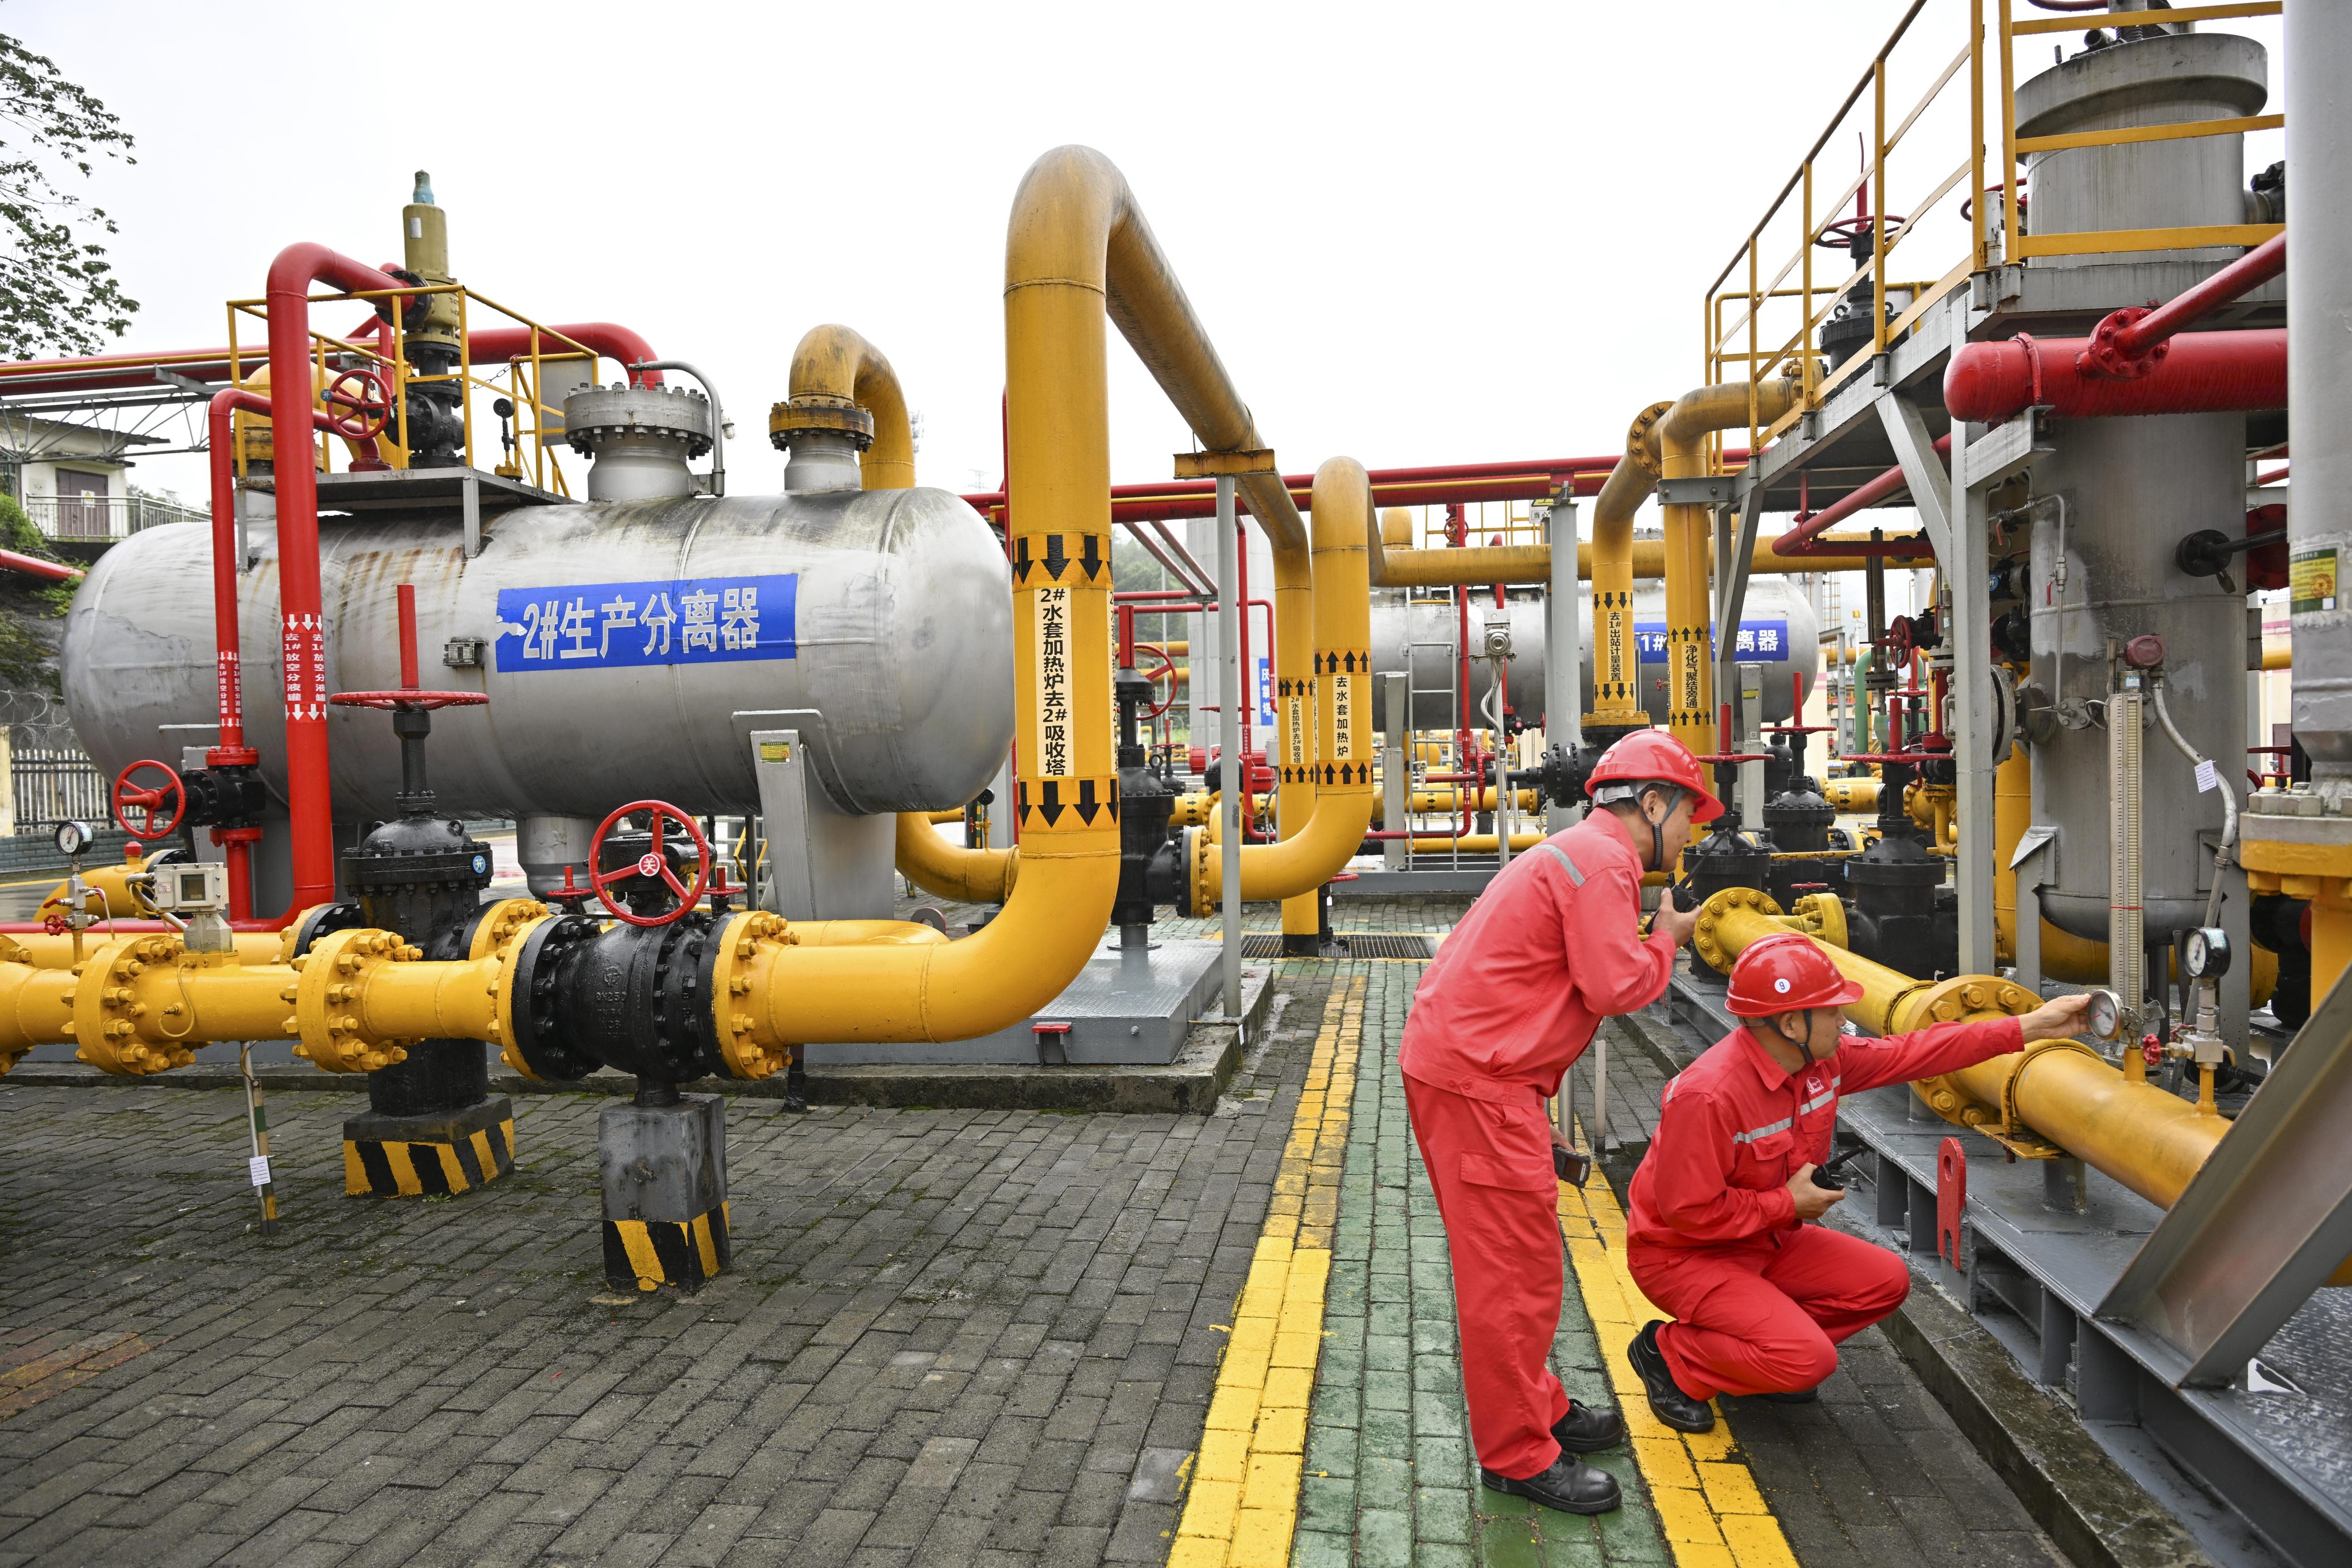 Sinopec technicians check equipment at a gas gathering and transmission station in Chongqing, China. The company is one of three Chinese oil and gas firms sanctioned by the Ukraine government for dealing with Russia. Photo: Xinhua